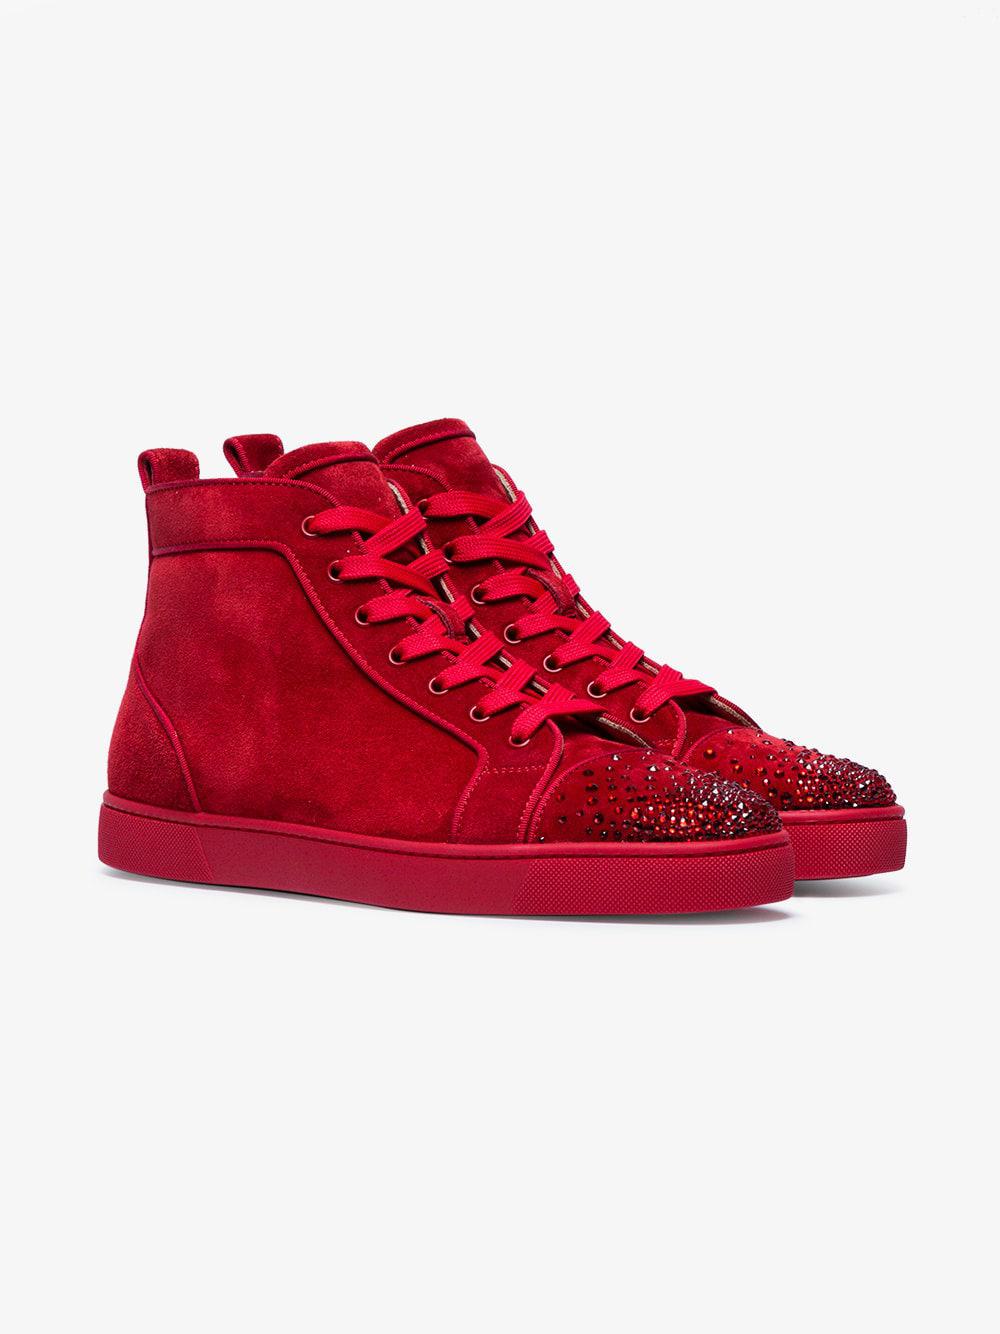 Lyst - Christian Louboutin Lou New Degra Sneakers in Red for Men